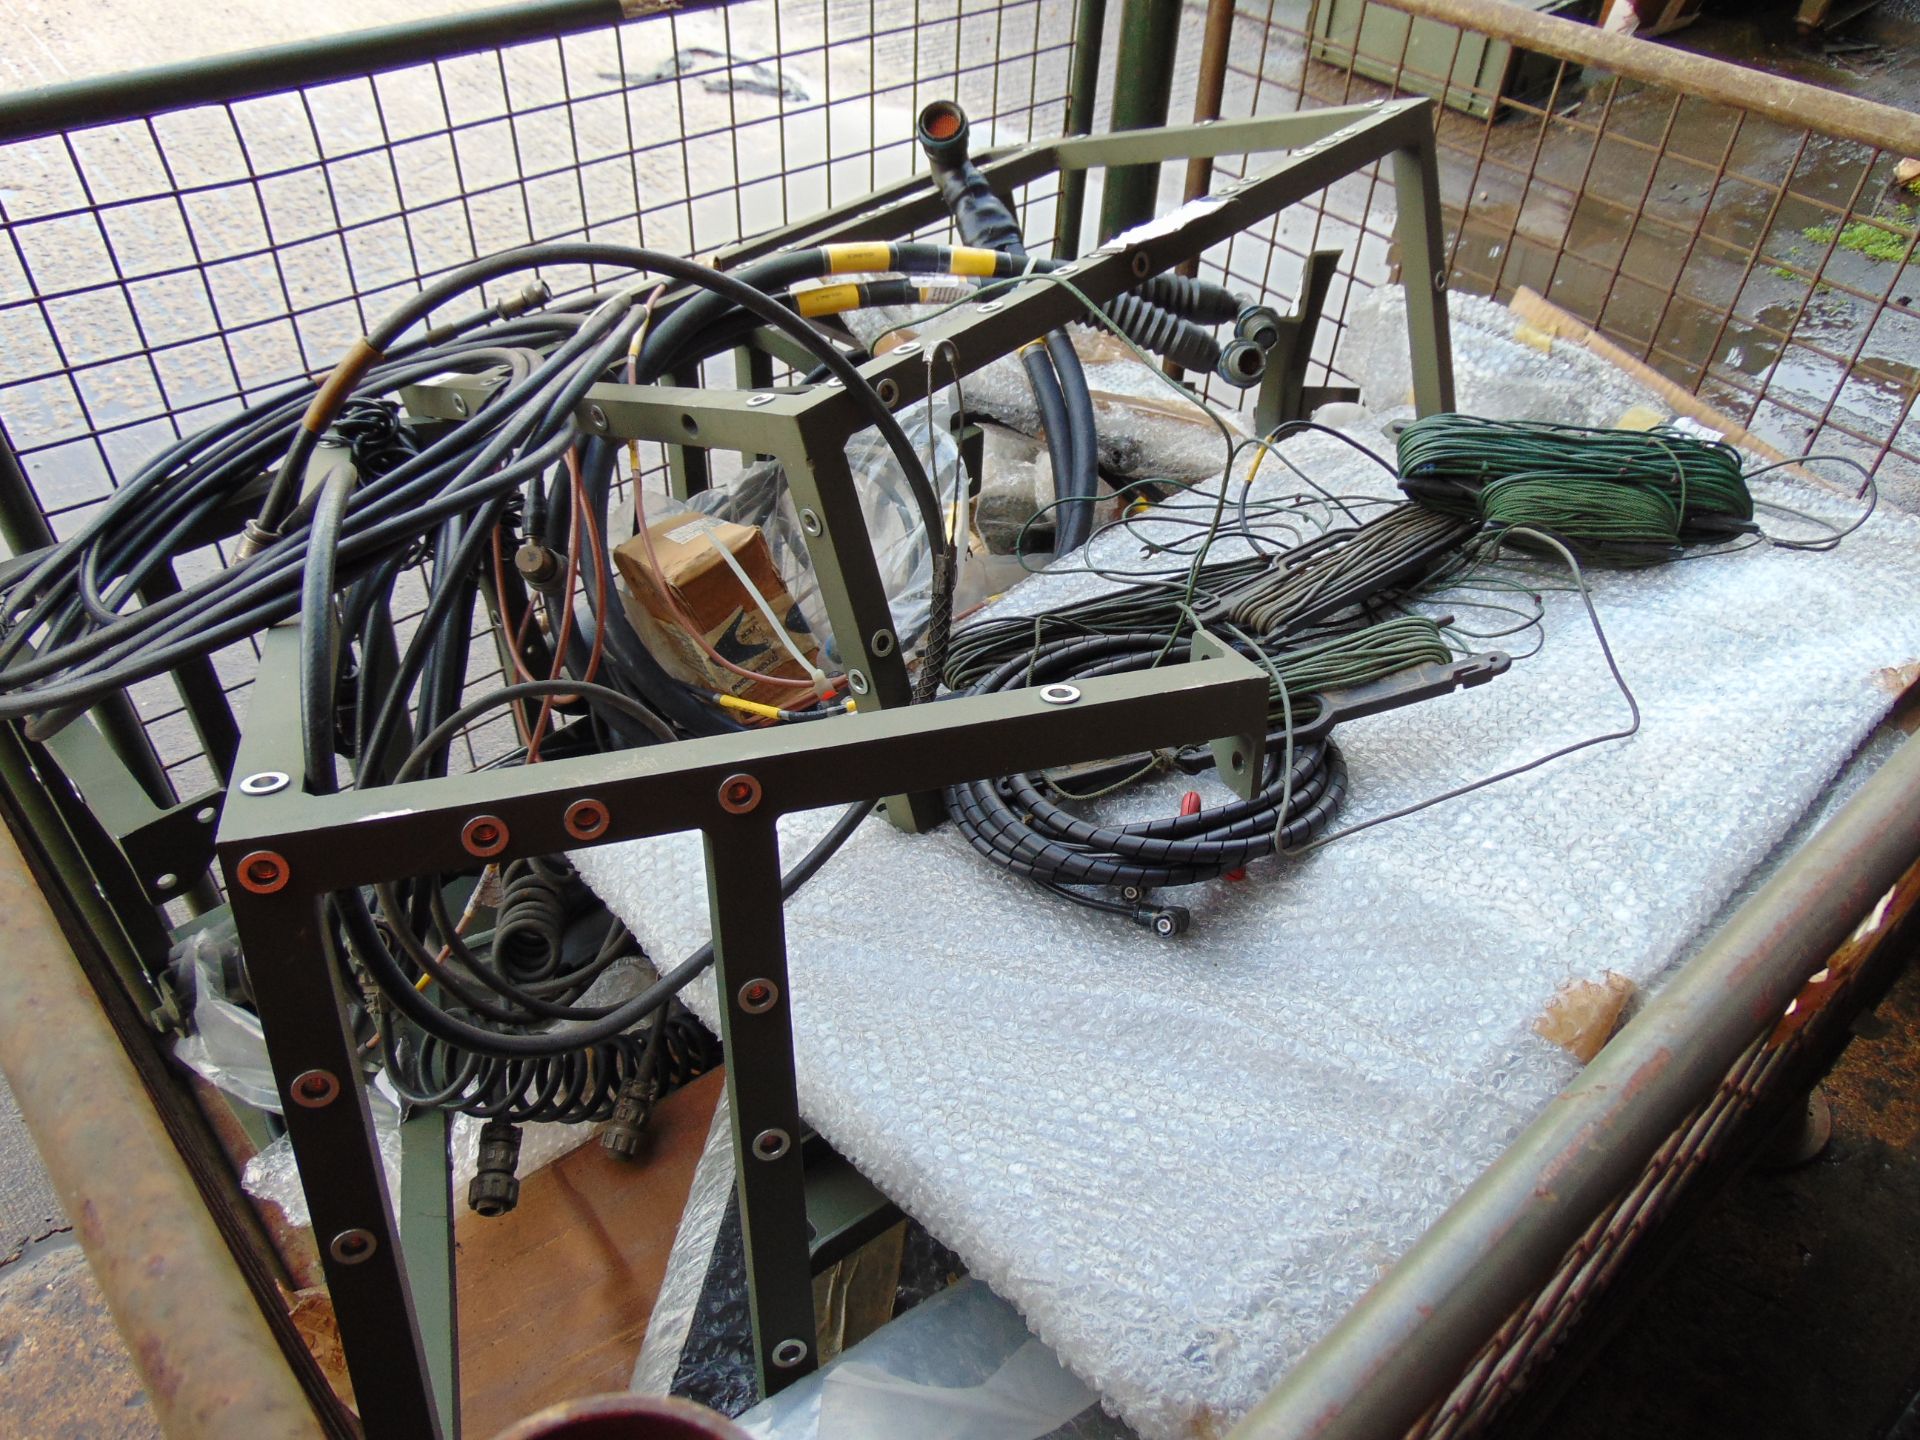 1 x Stillage of Clansman Fitting Kits Cables, Antennas etc - Image 3 of 6